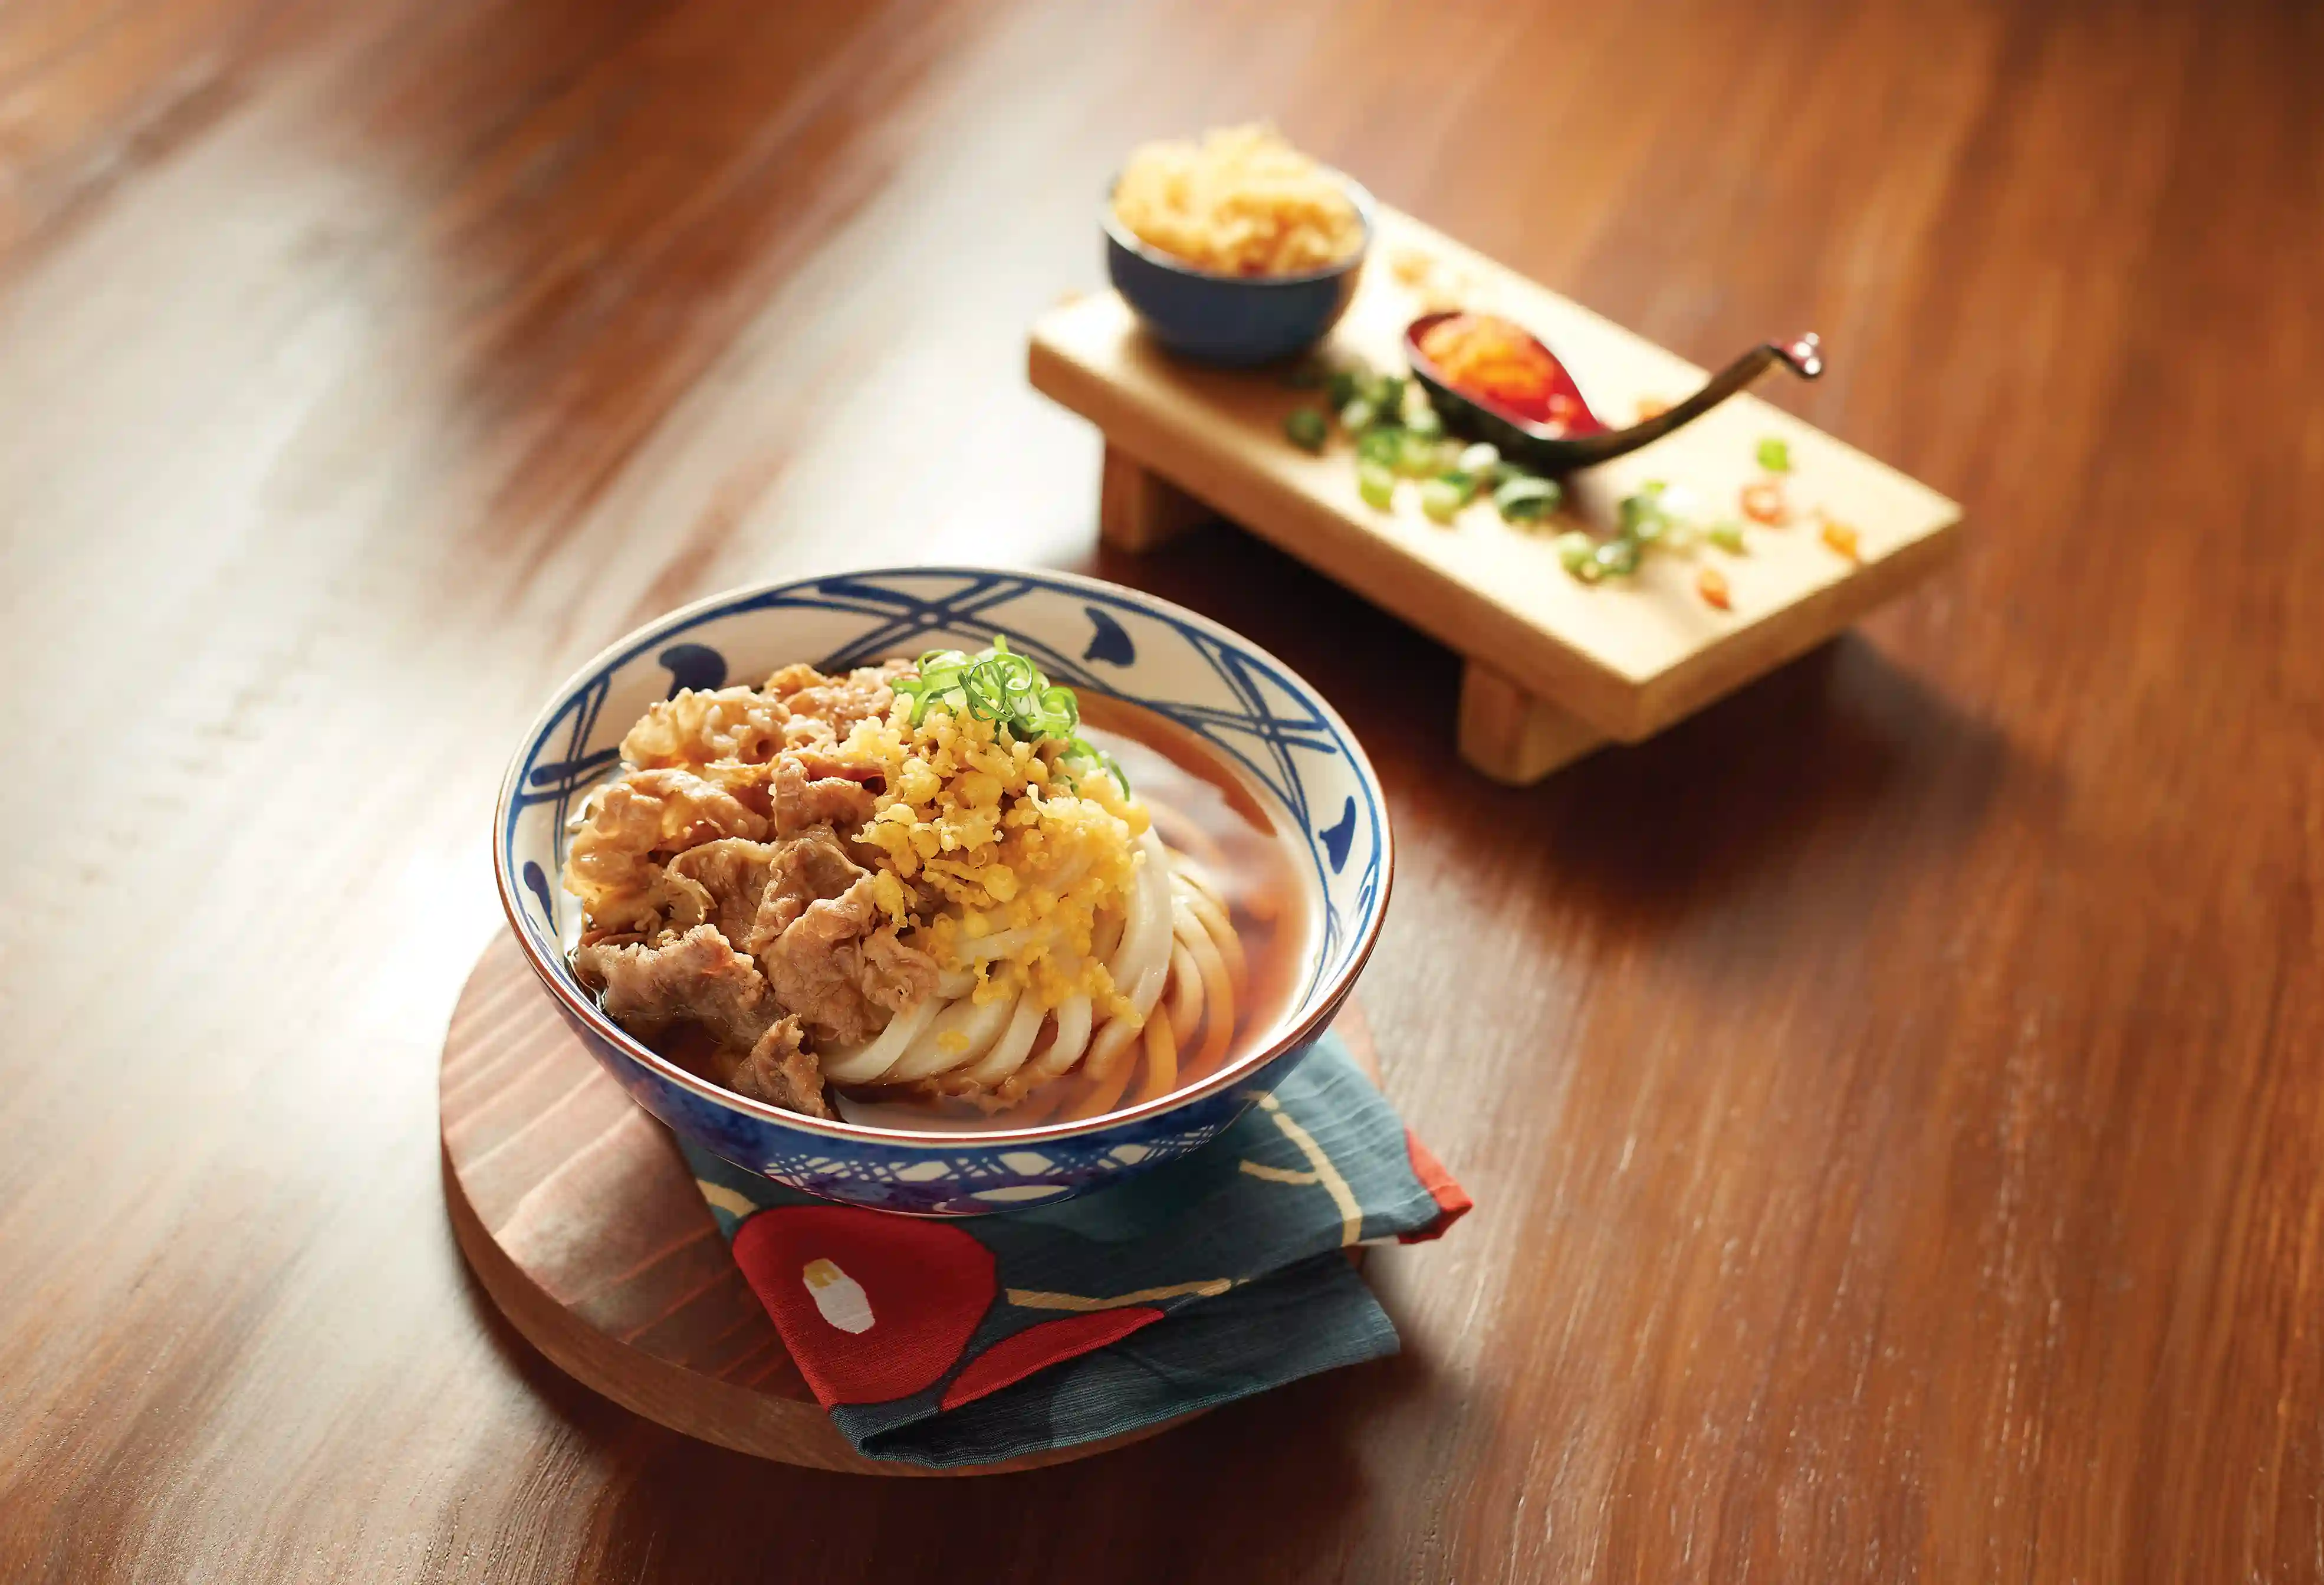 What Is Udon?